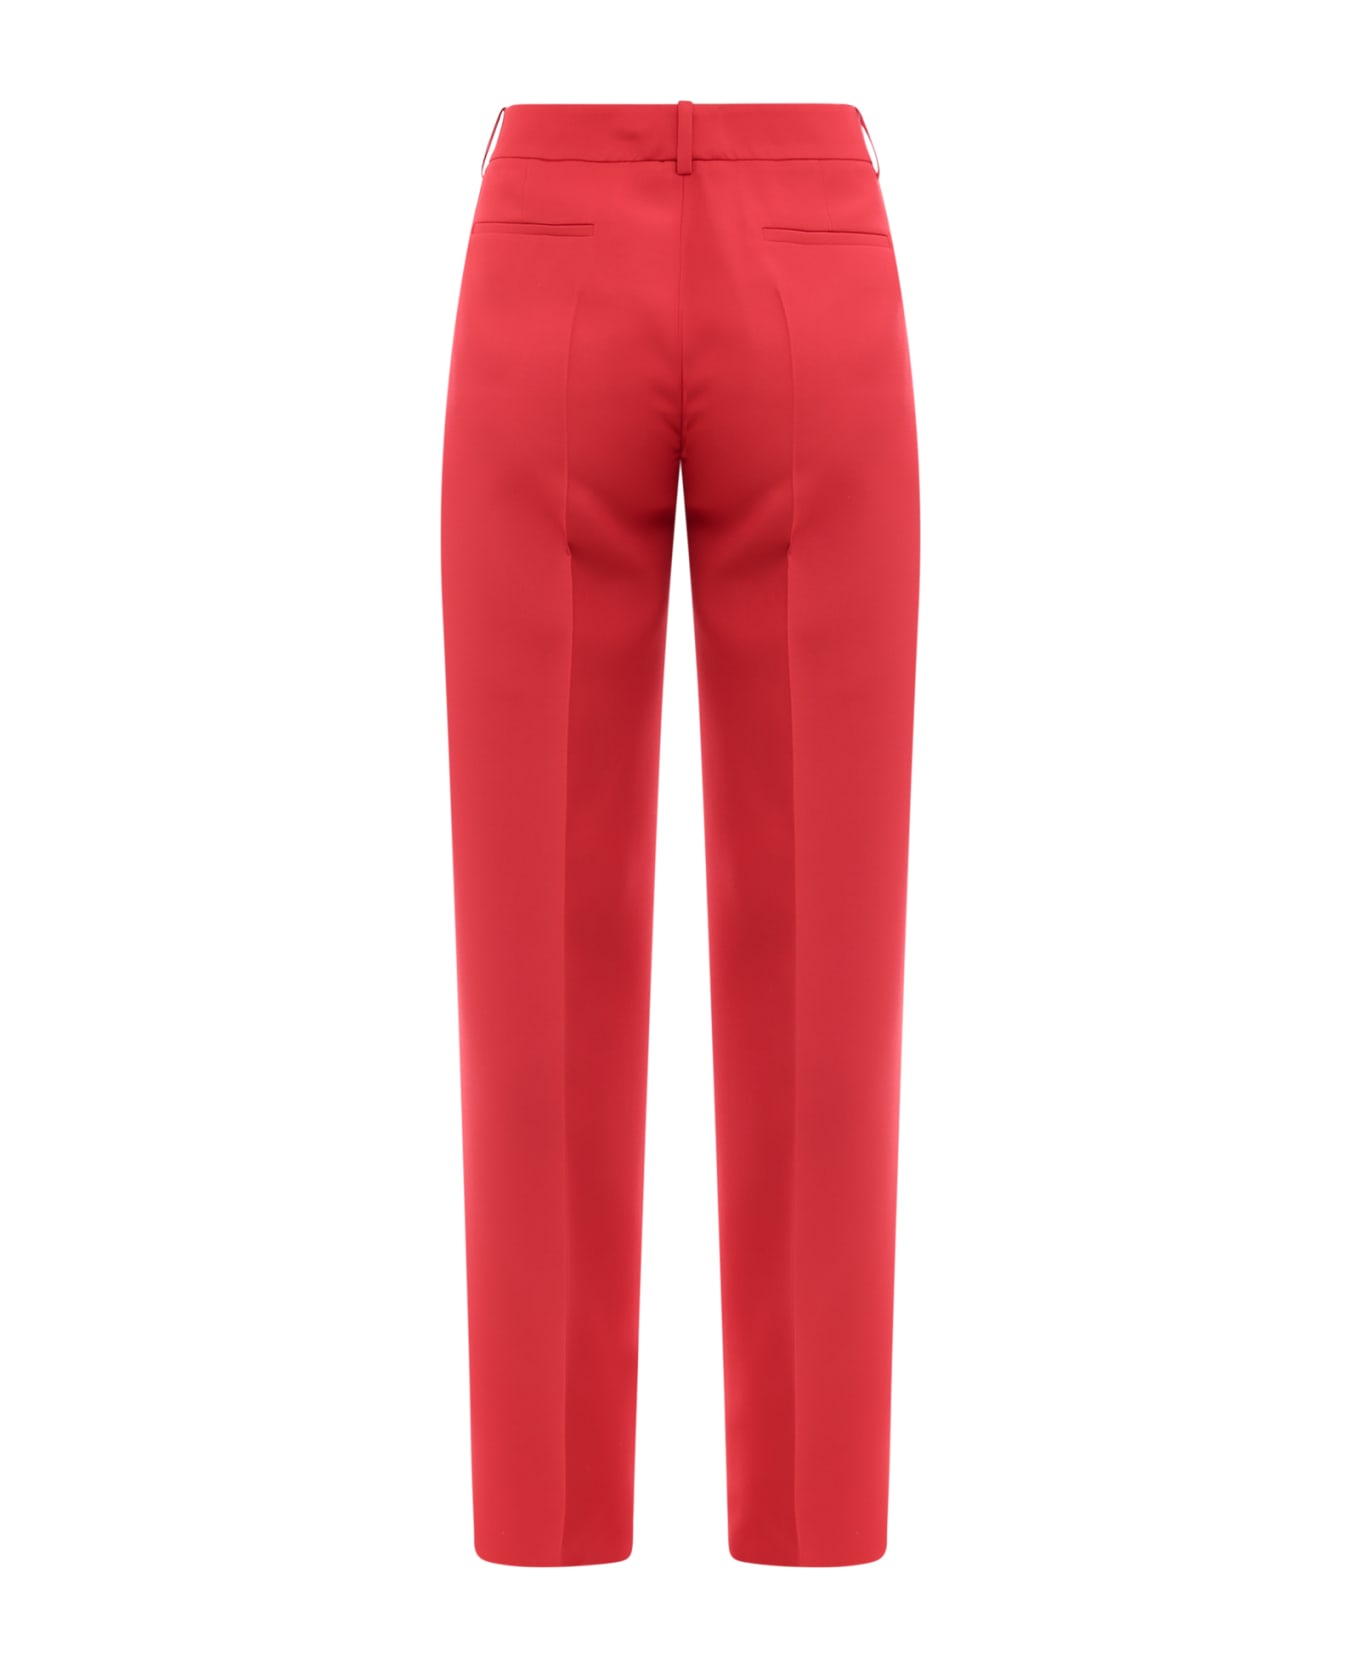 Valentino Trouser - Red